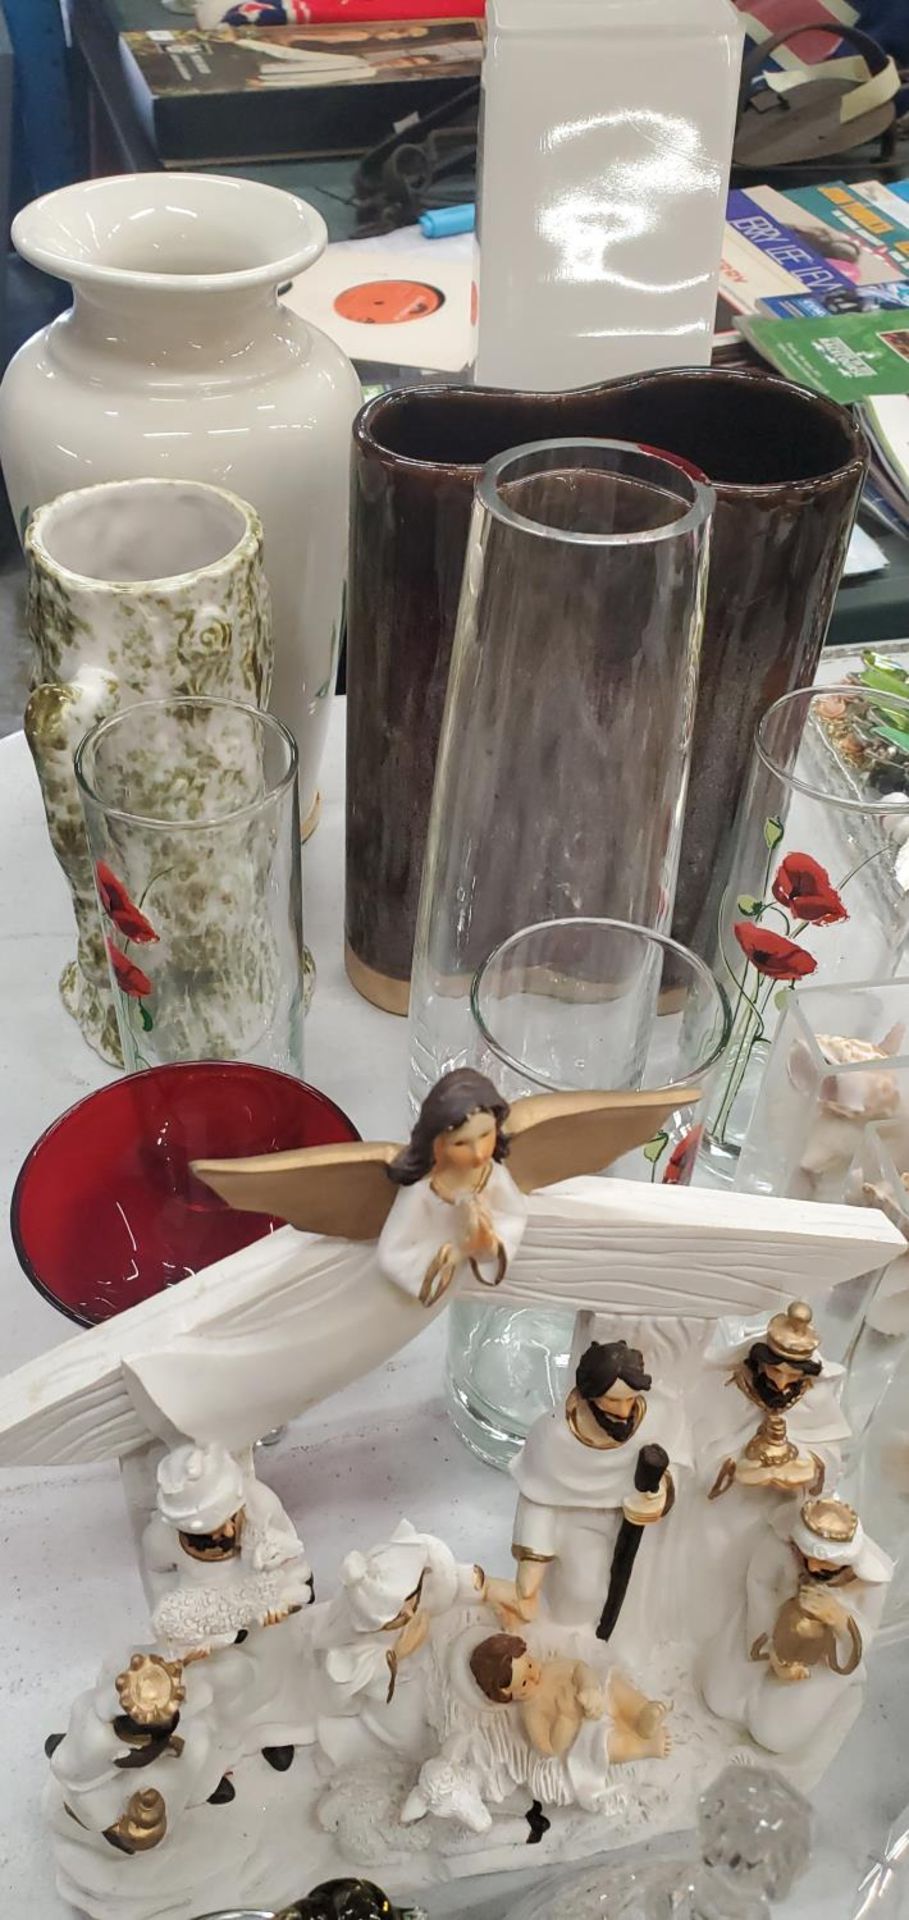 A MIXED LOT TO INCLUDE VASES, TUMBLERS, PHOTO FRAMES, SHELLS, A NATIVITY SCENE, GLASSWARE, ETC - Bild 2 aus 3